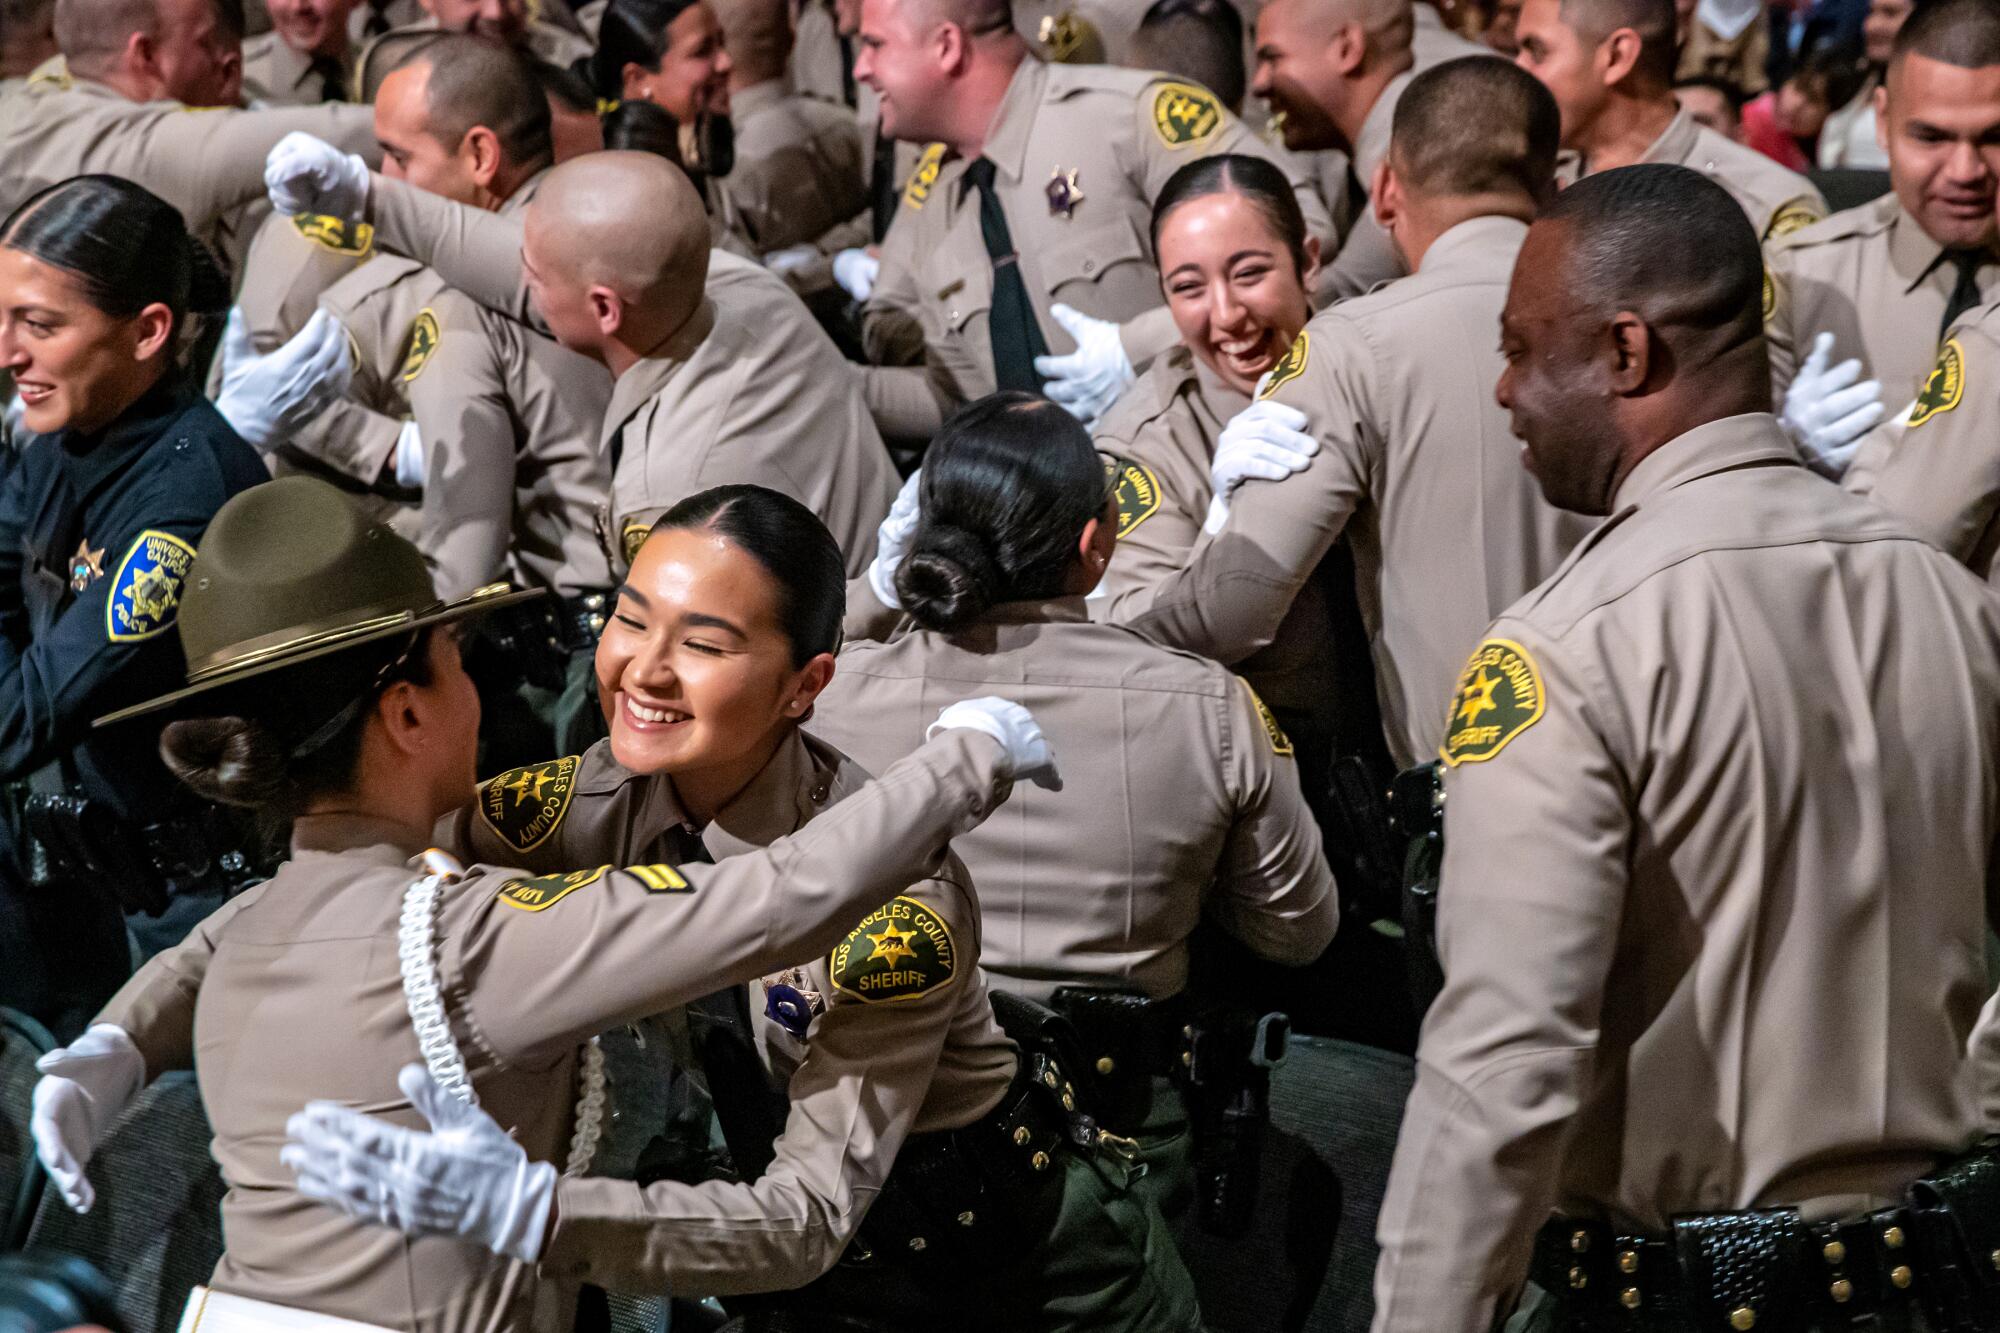 Sheriff's academy cadets celebrate at their graduation ceremony 